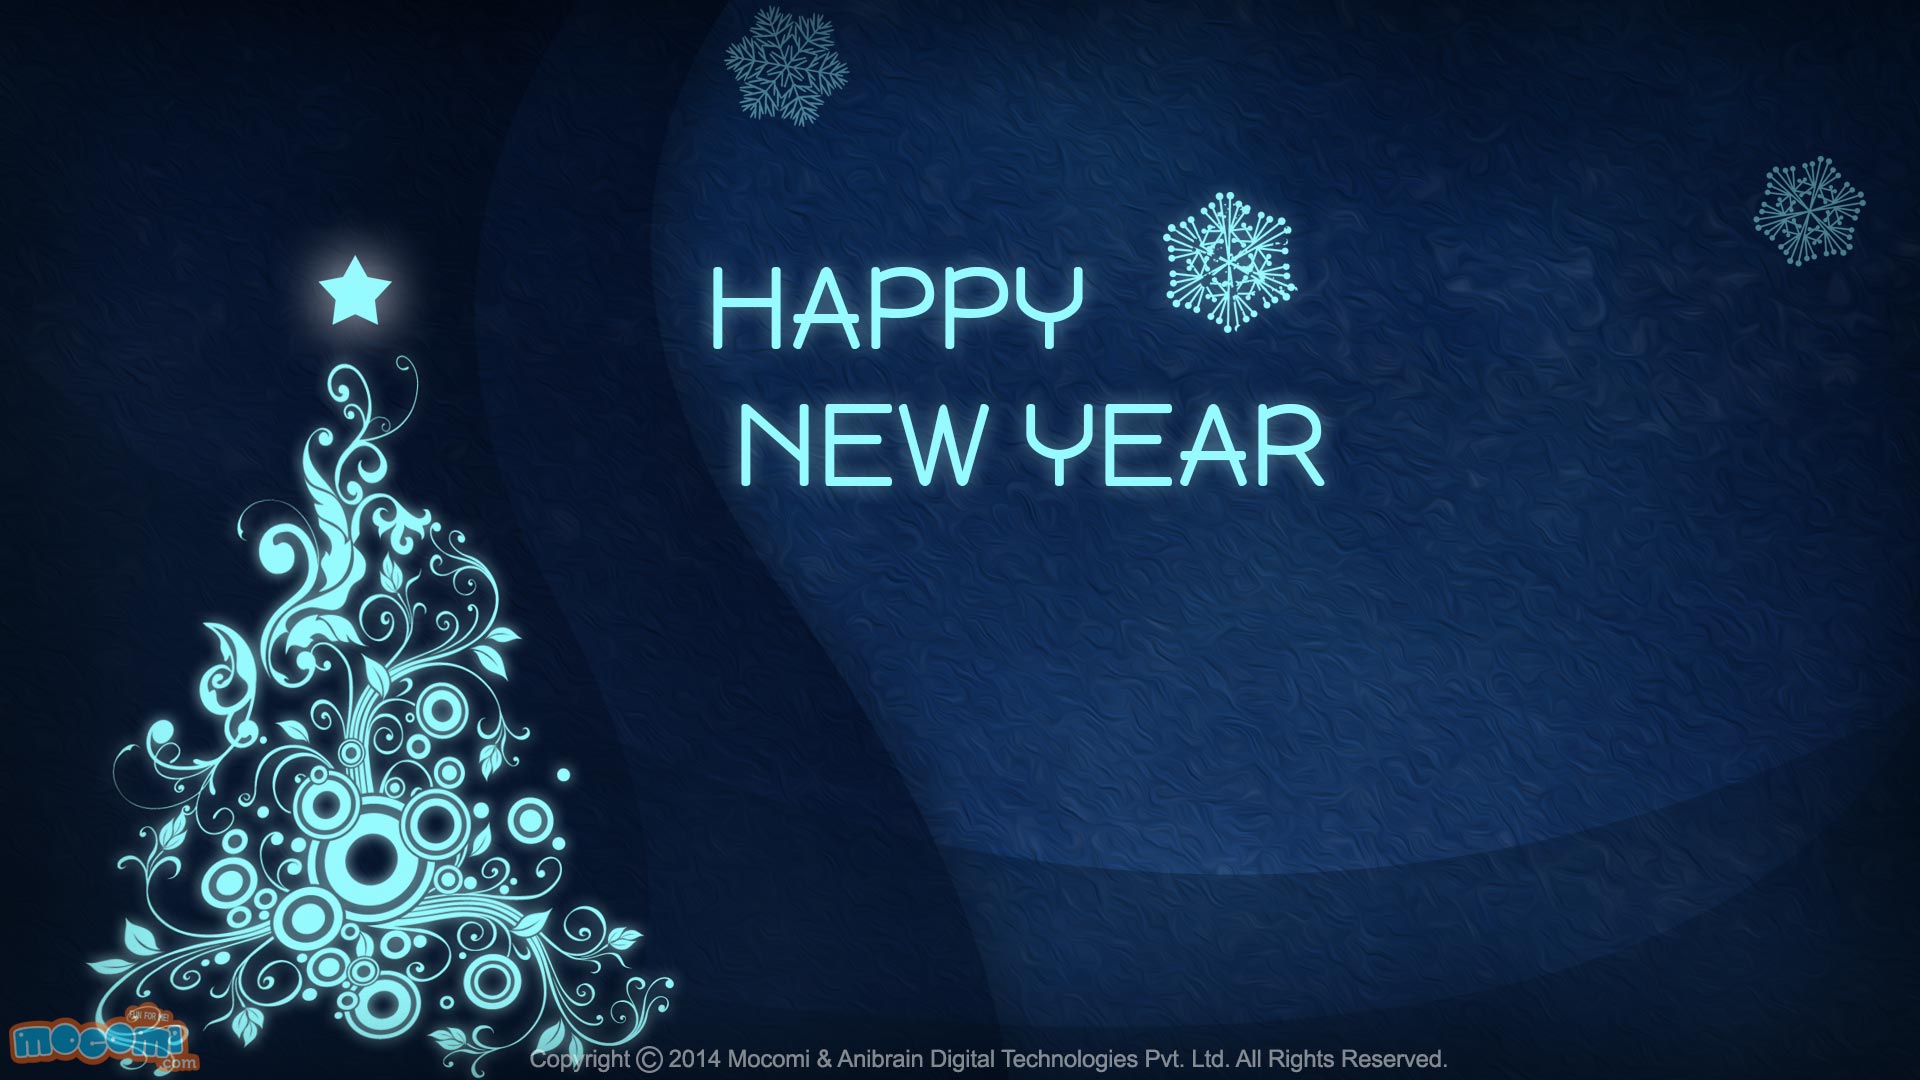 happy new year wallpaper,text,font,graphic design,graphics,illustration